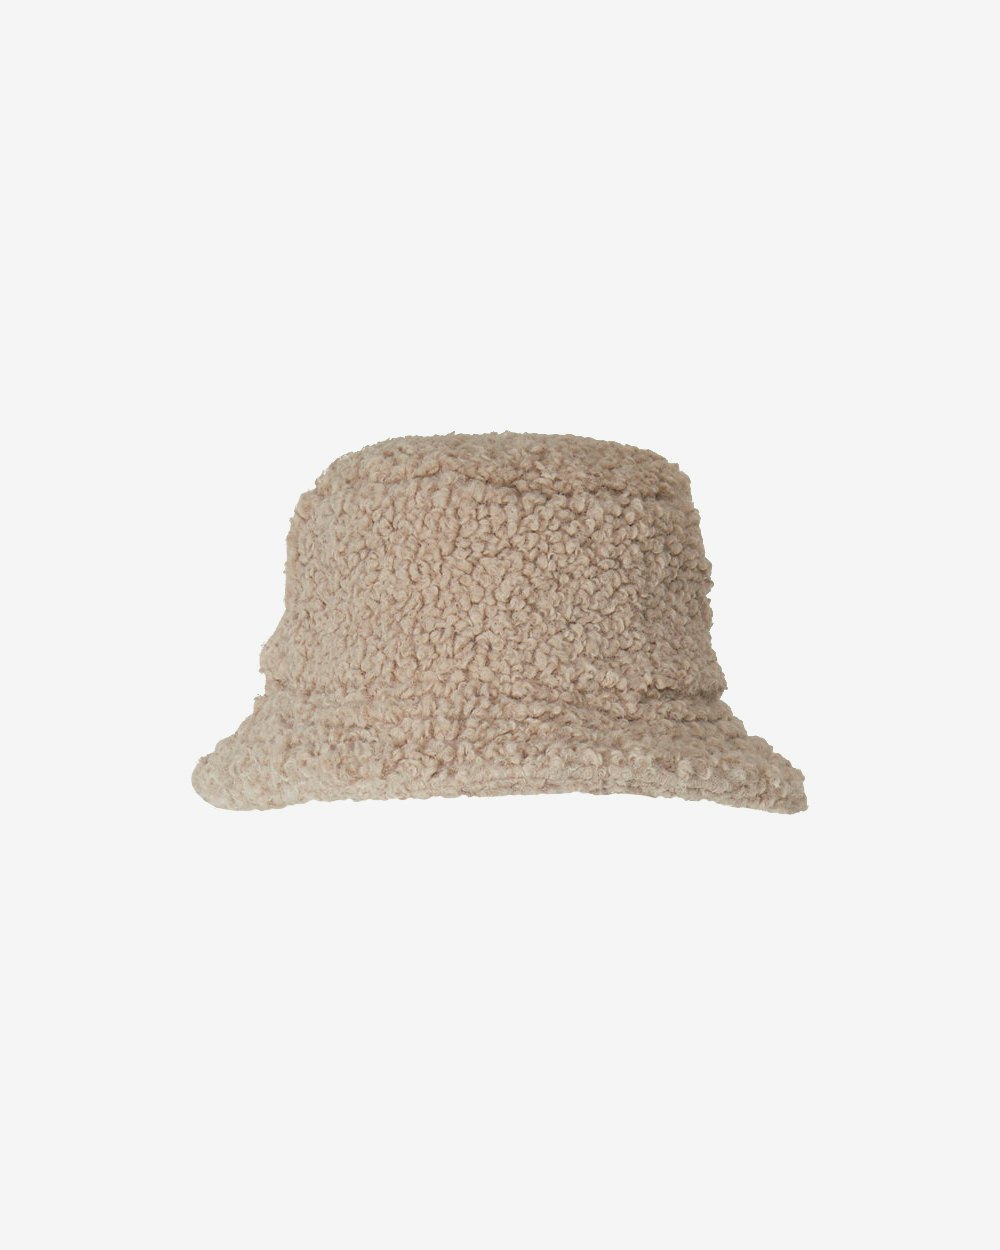 Shop Fuzzy Bucket Hats To Keep You Cozy & Warm This Winter 2022